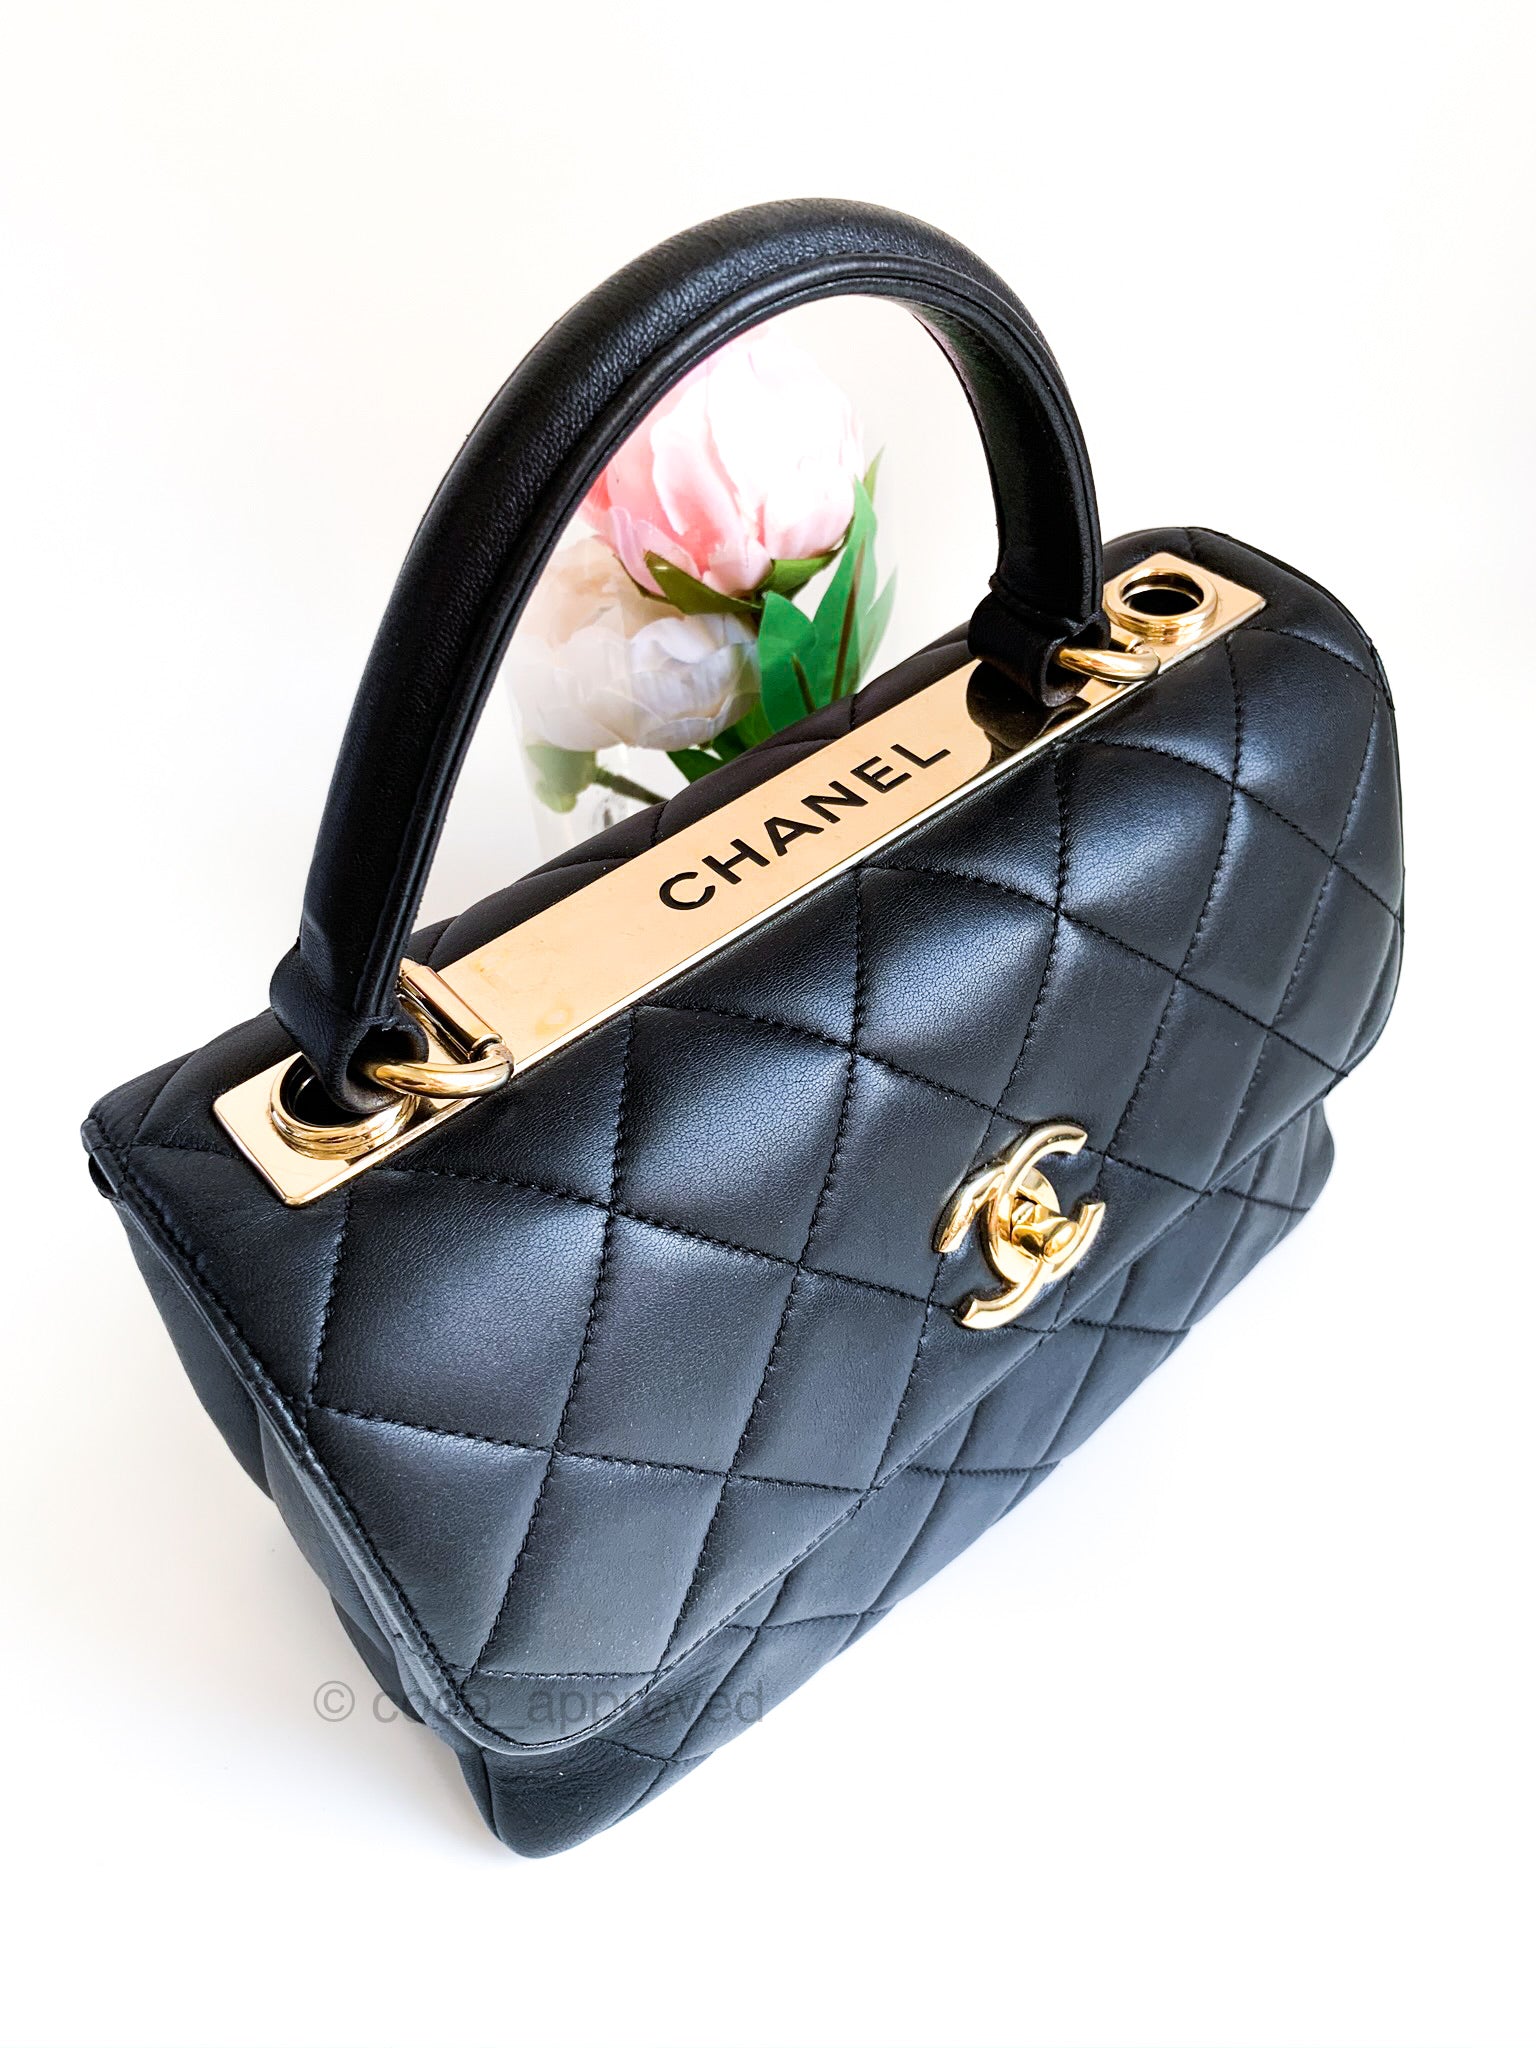 Chanel Mini Quilted Trendy CC Clutch With Chain Black Lambskin Gold Ha –  Coco Approved Studio